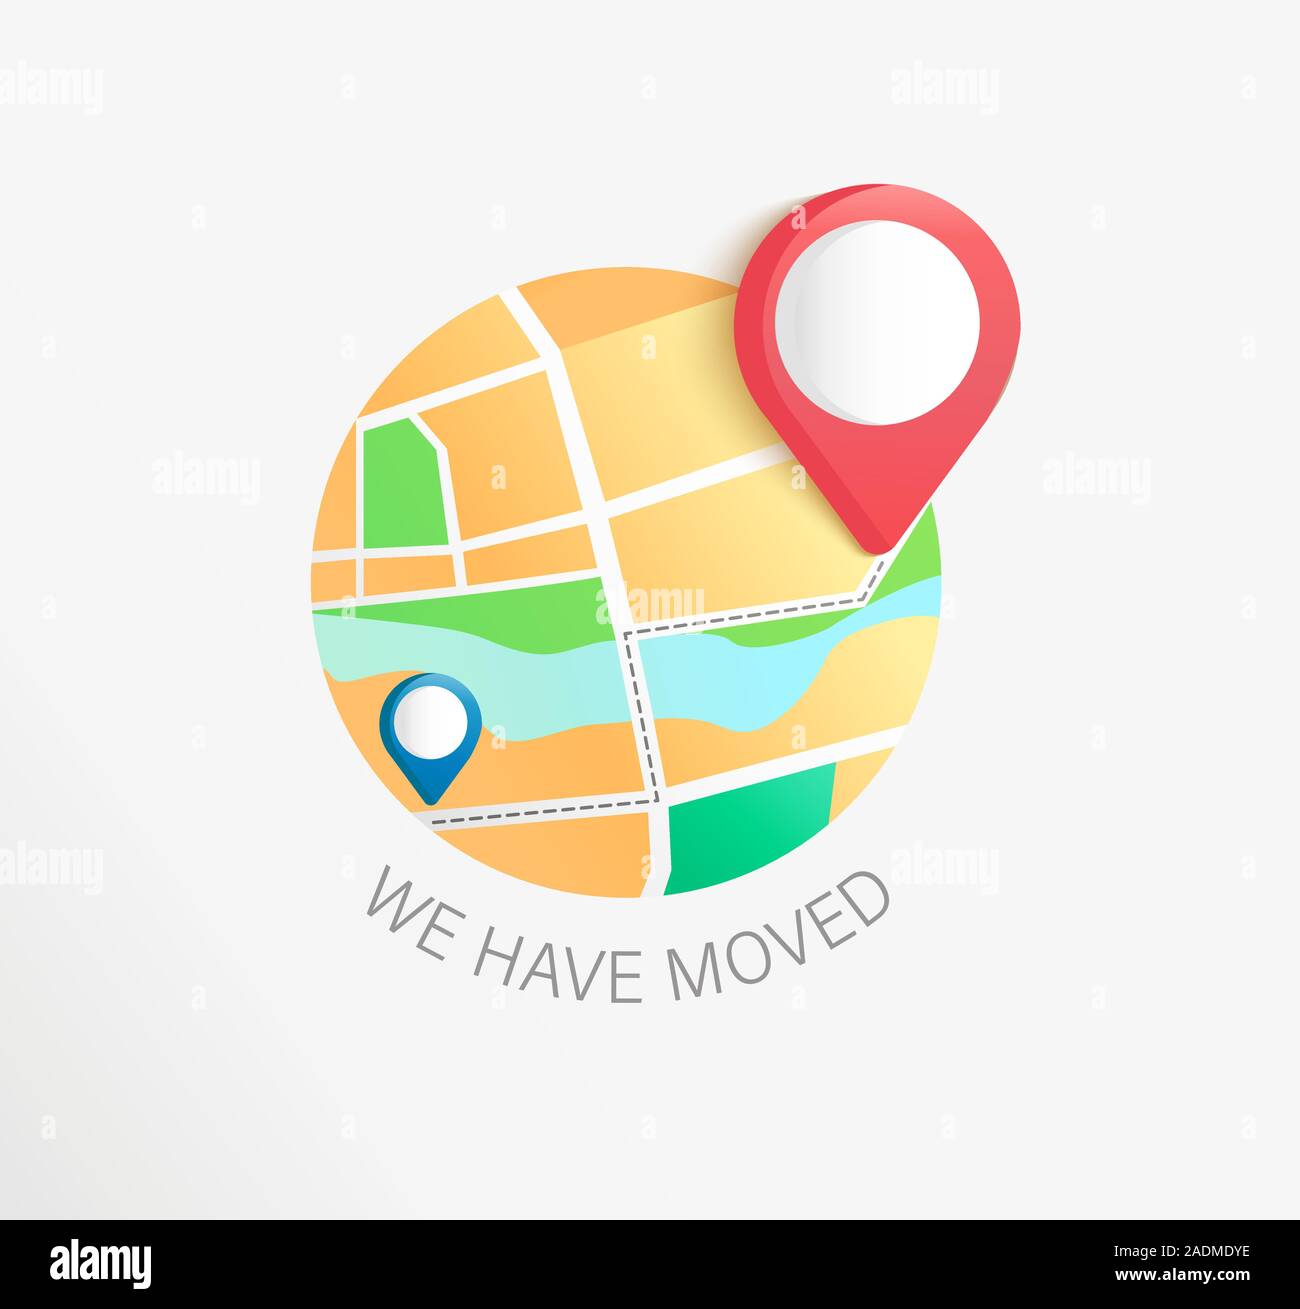 We have moved, concept of business relocation. Stock Vector